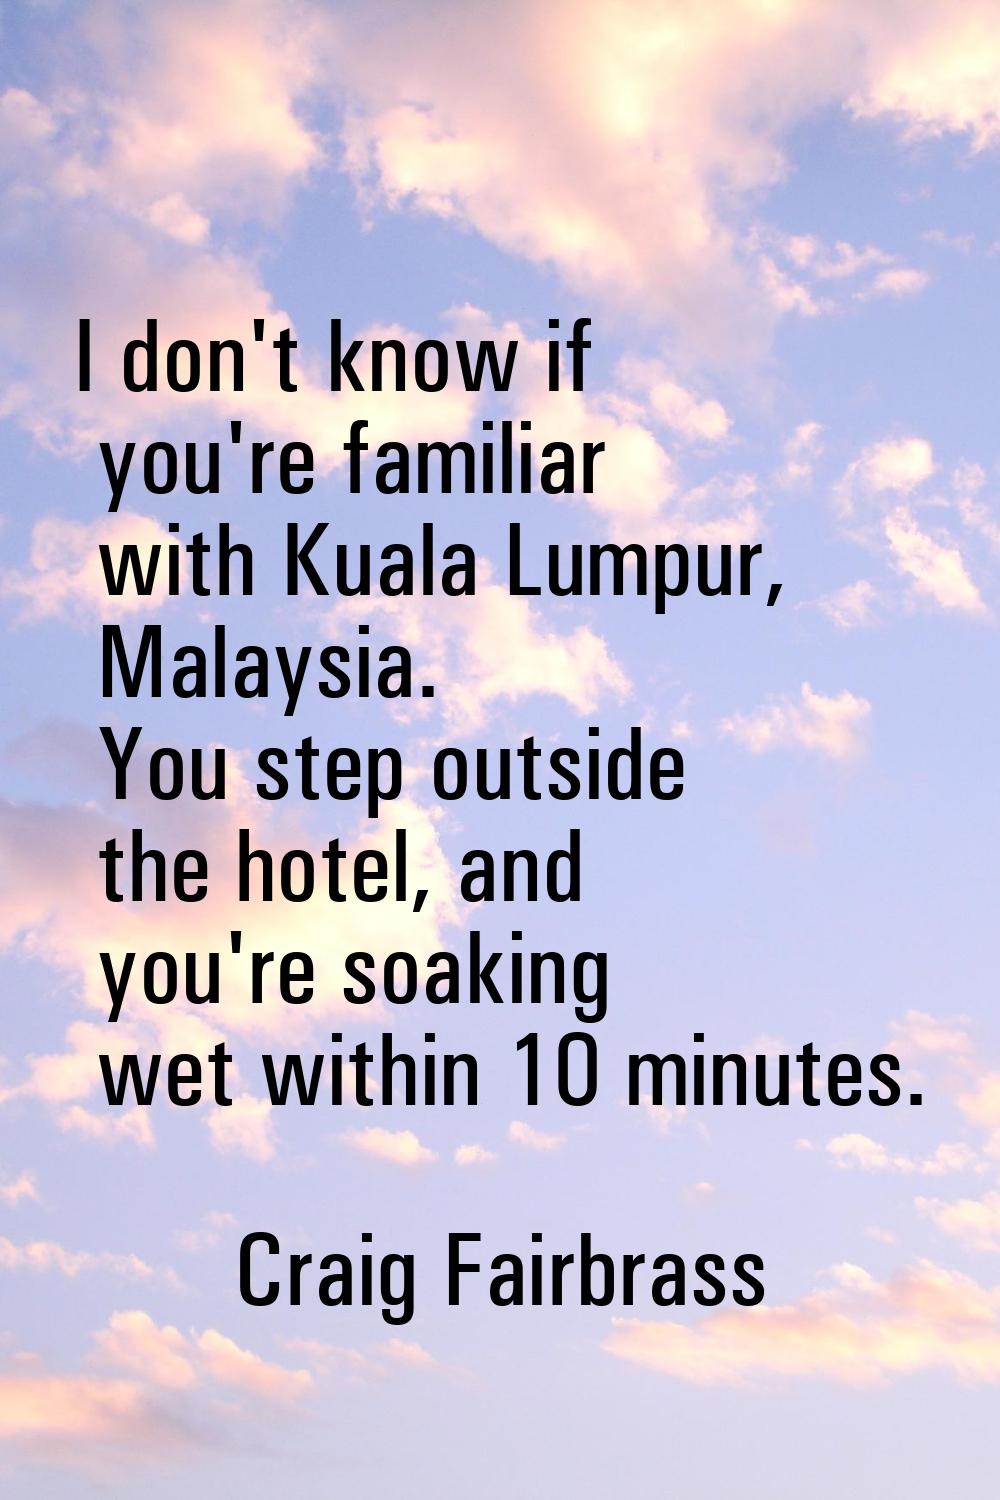 I don't know if you're familiar with Kuala Lumpur, Malaysia. You step outside the hotel, and you're